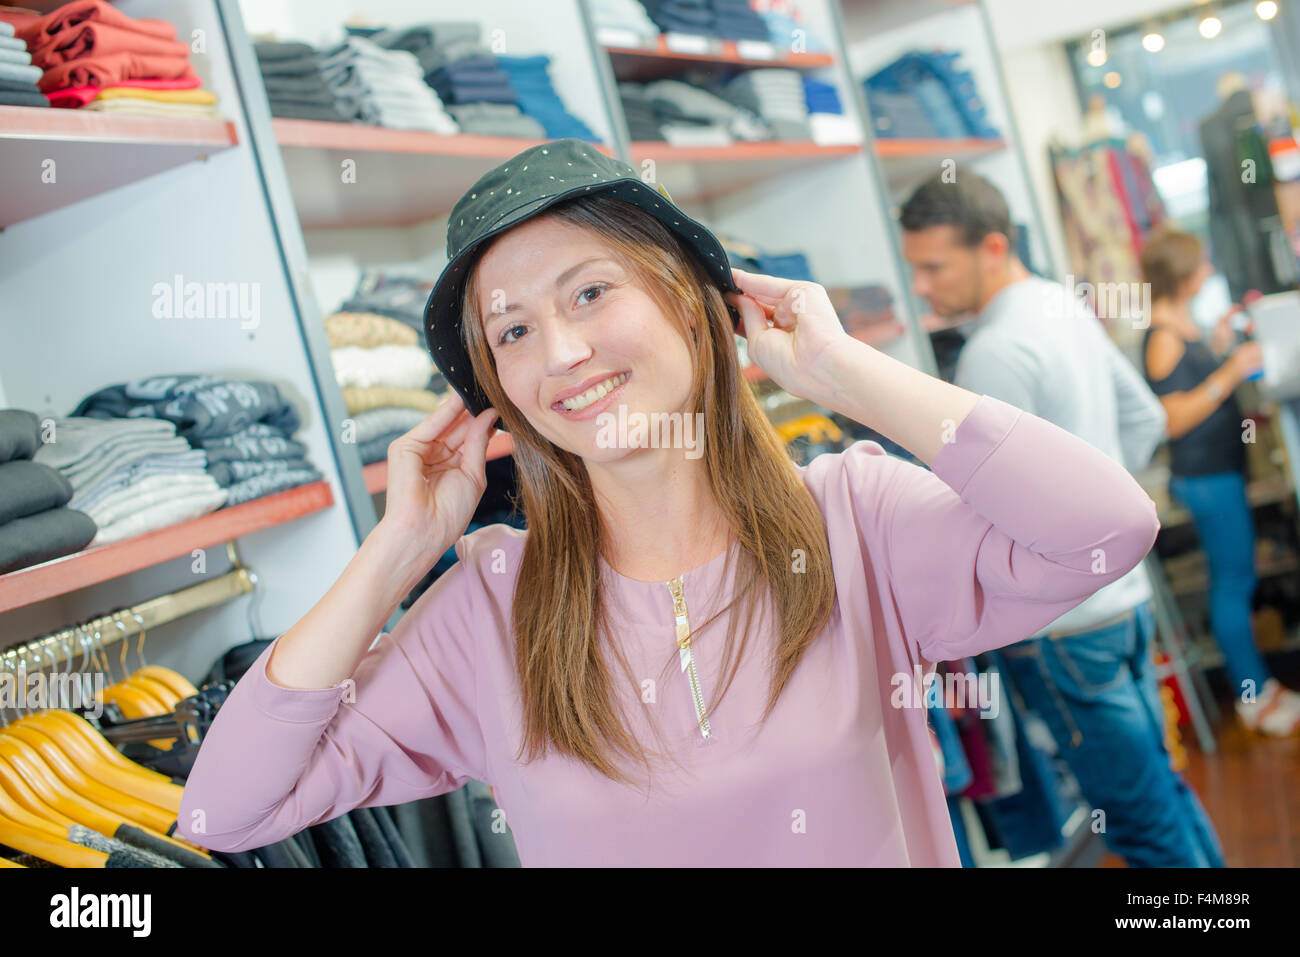 Lady trying on hat Stock Photo